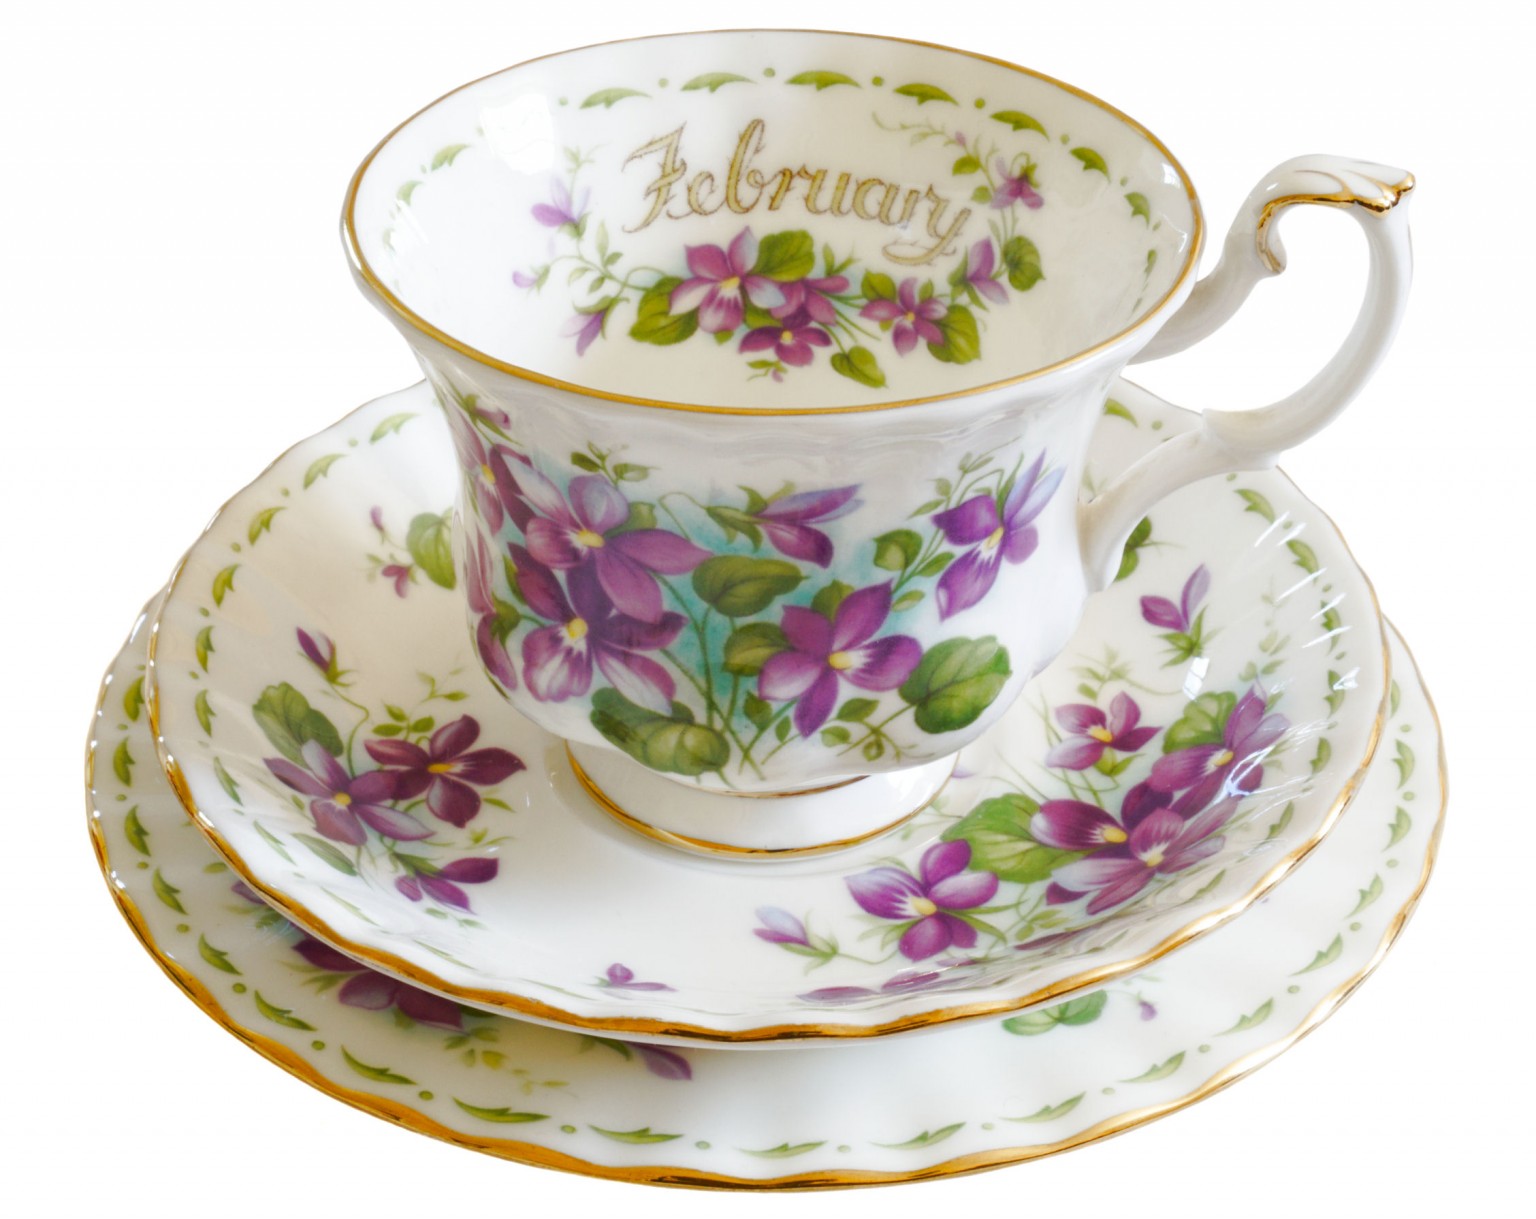 Royal Albert Monthly February Violets tea cup trio